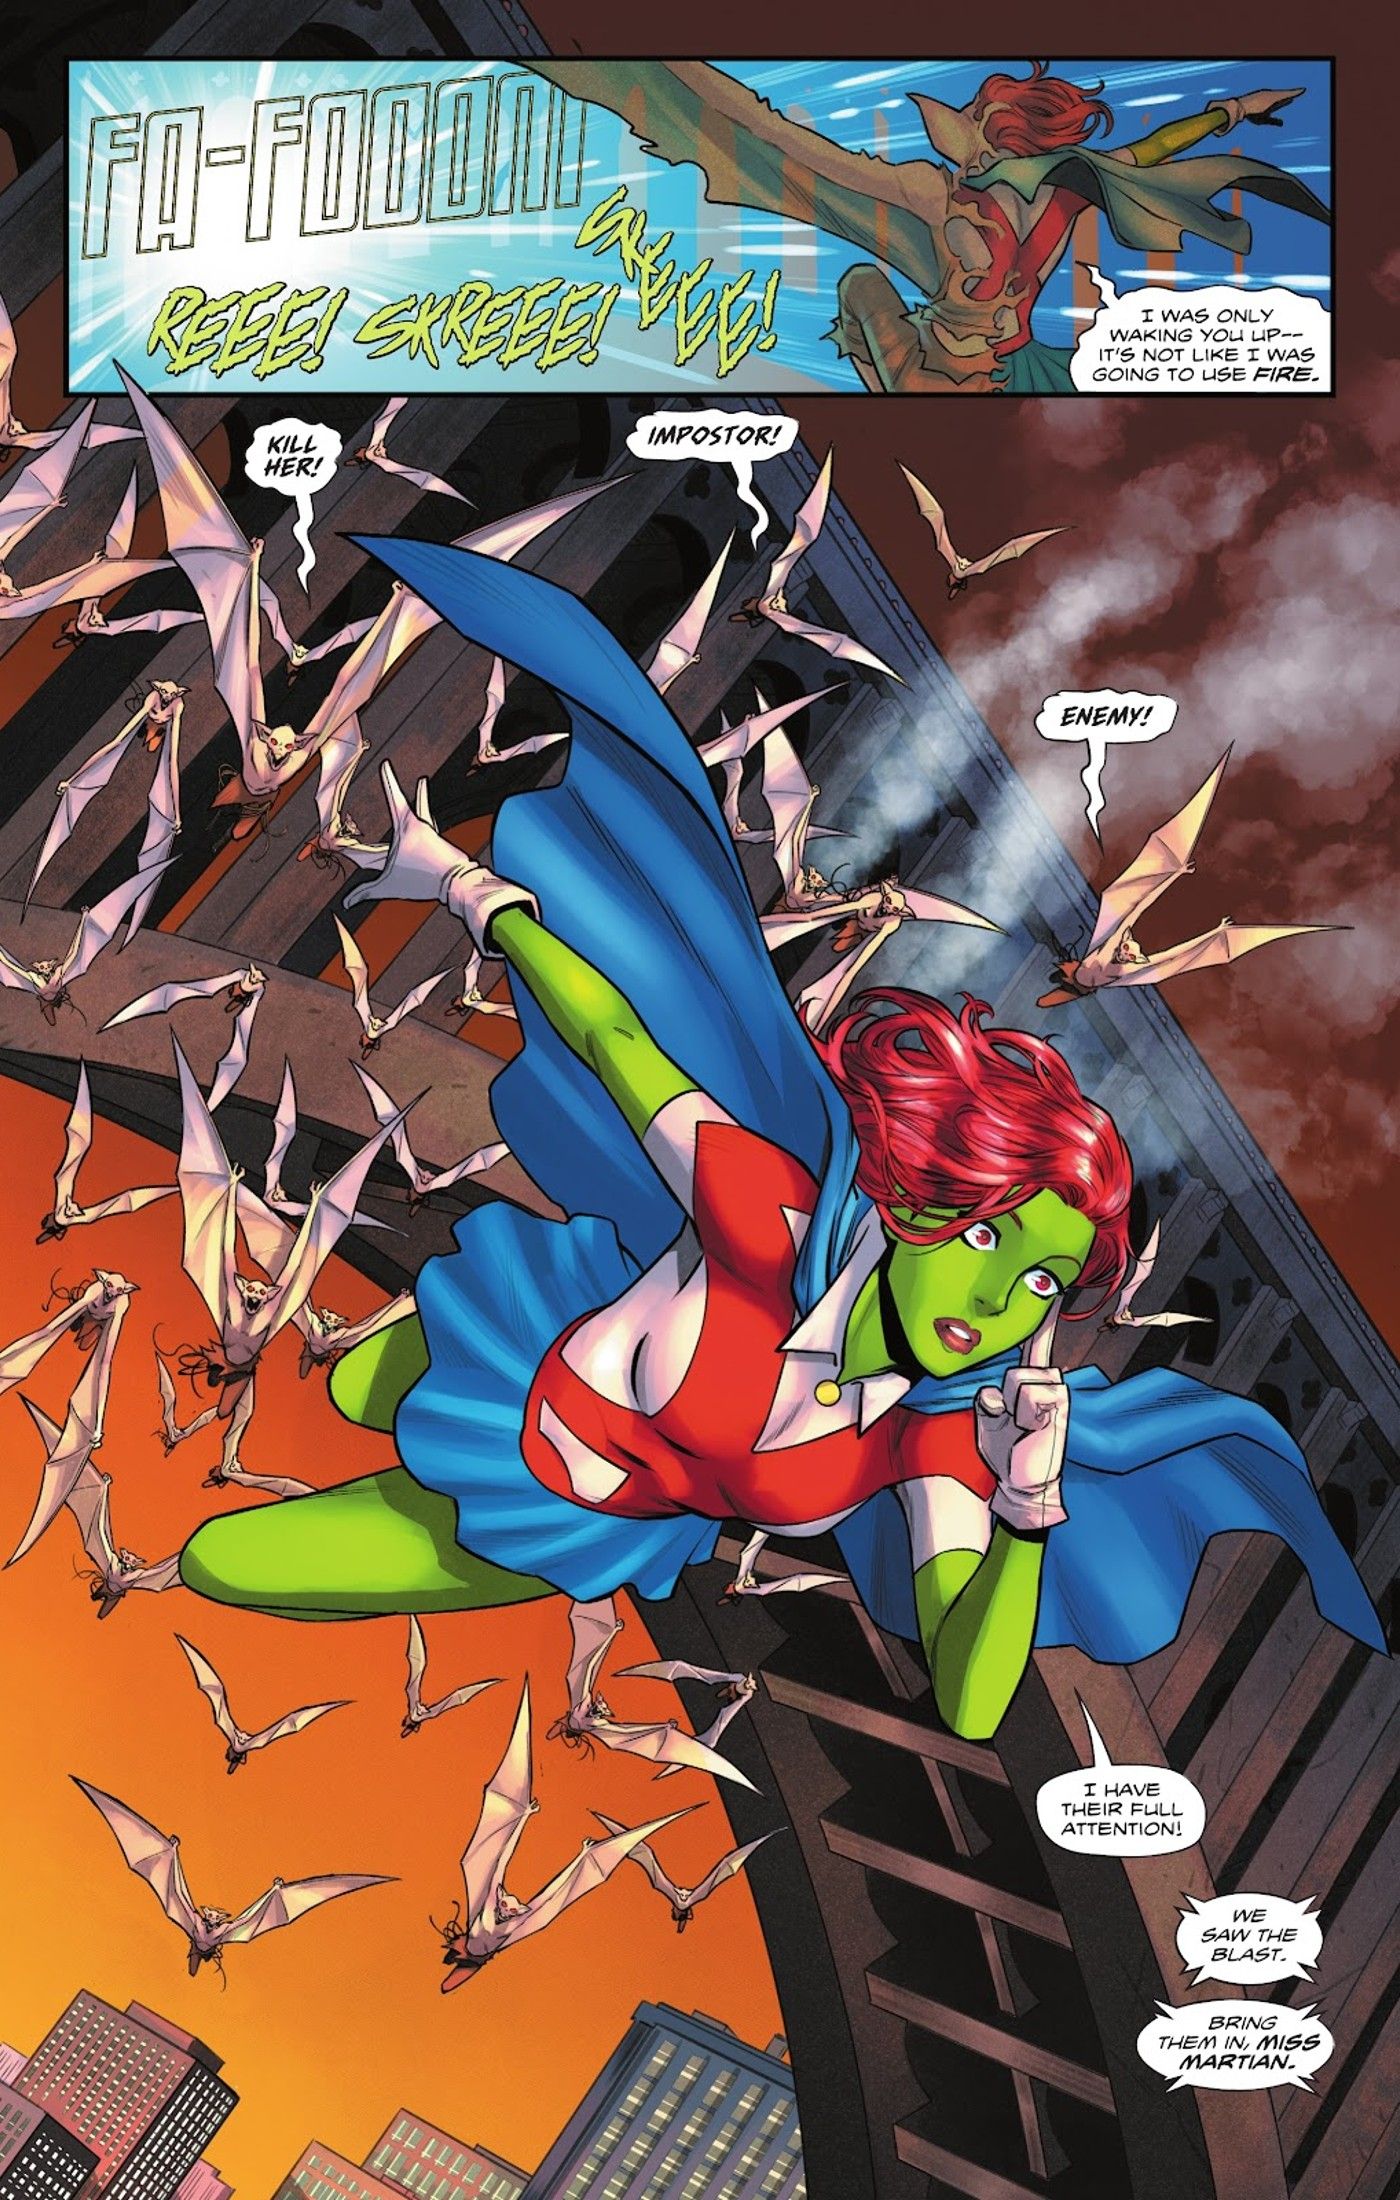 Comic book page: Miss Martian chased by vampires while talking to Black Canary and Green Arrow